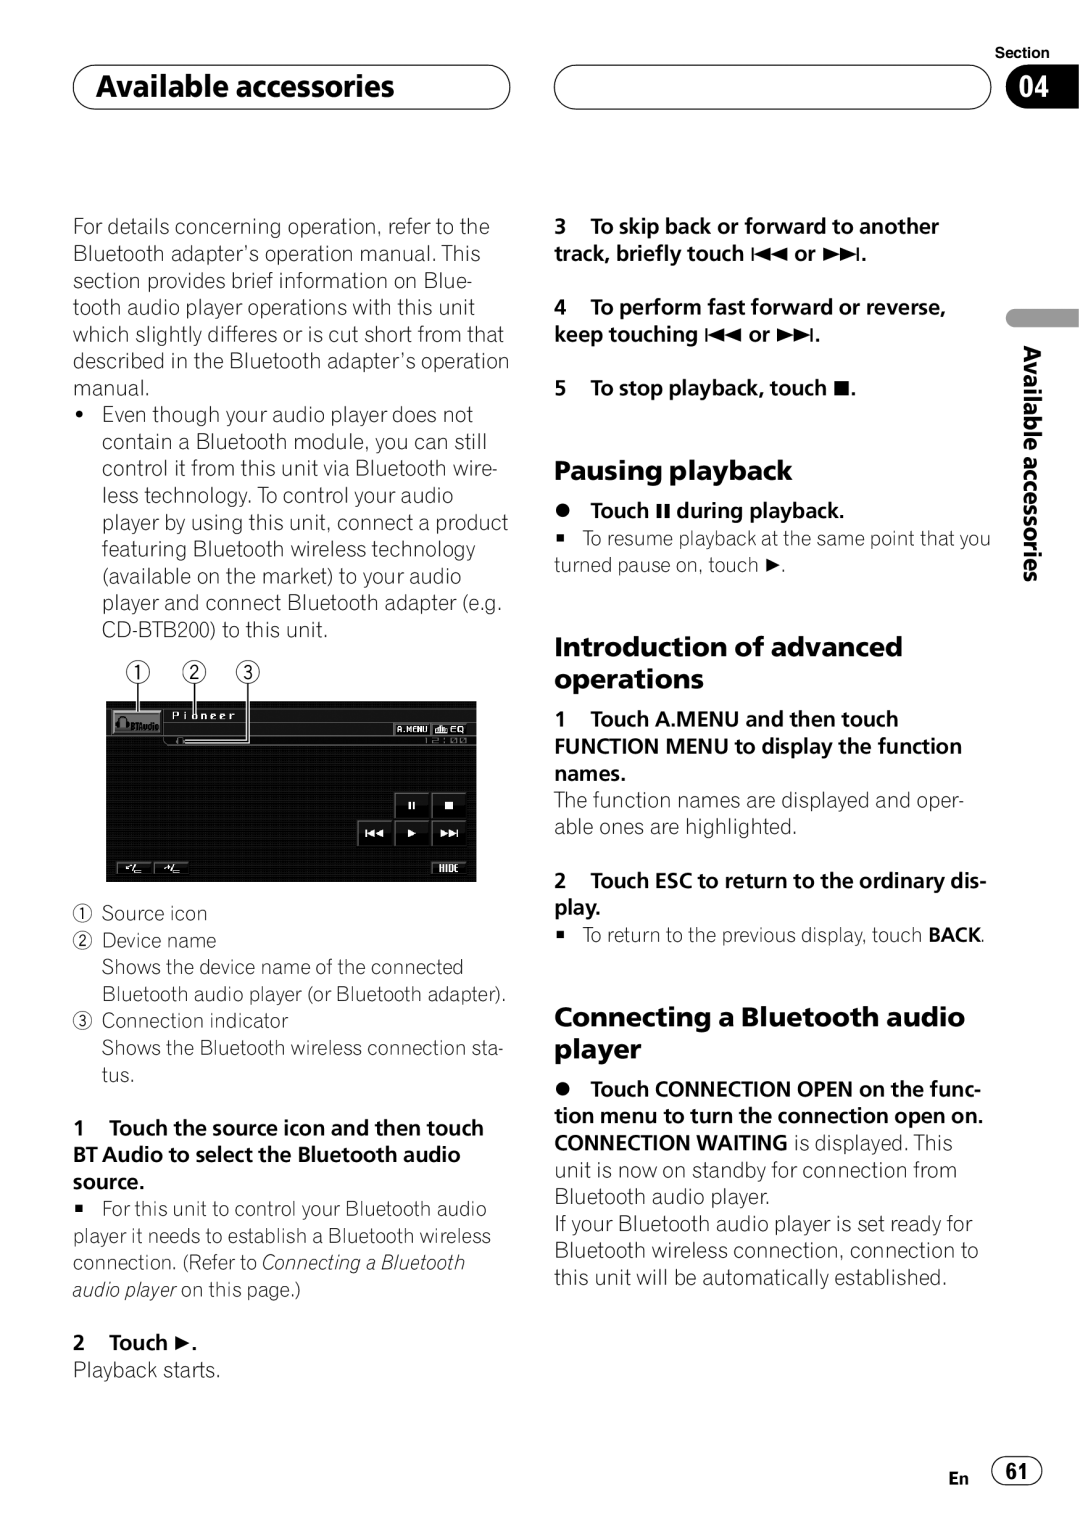 Pioneer AVH-P5900D operation manual Pausing playback, Connecting a Bluetooth audio player, Available accessories 